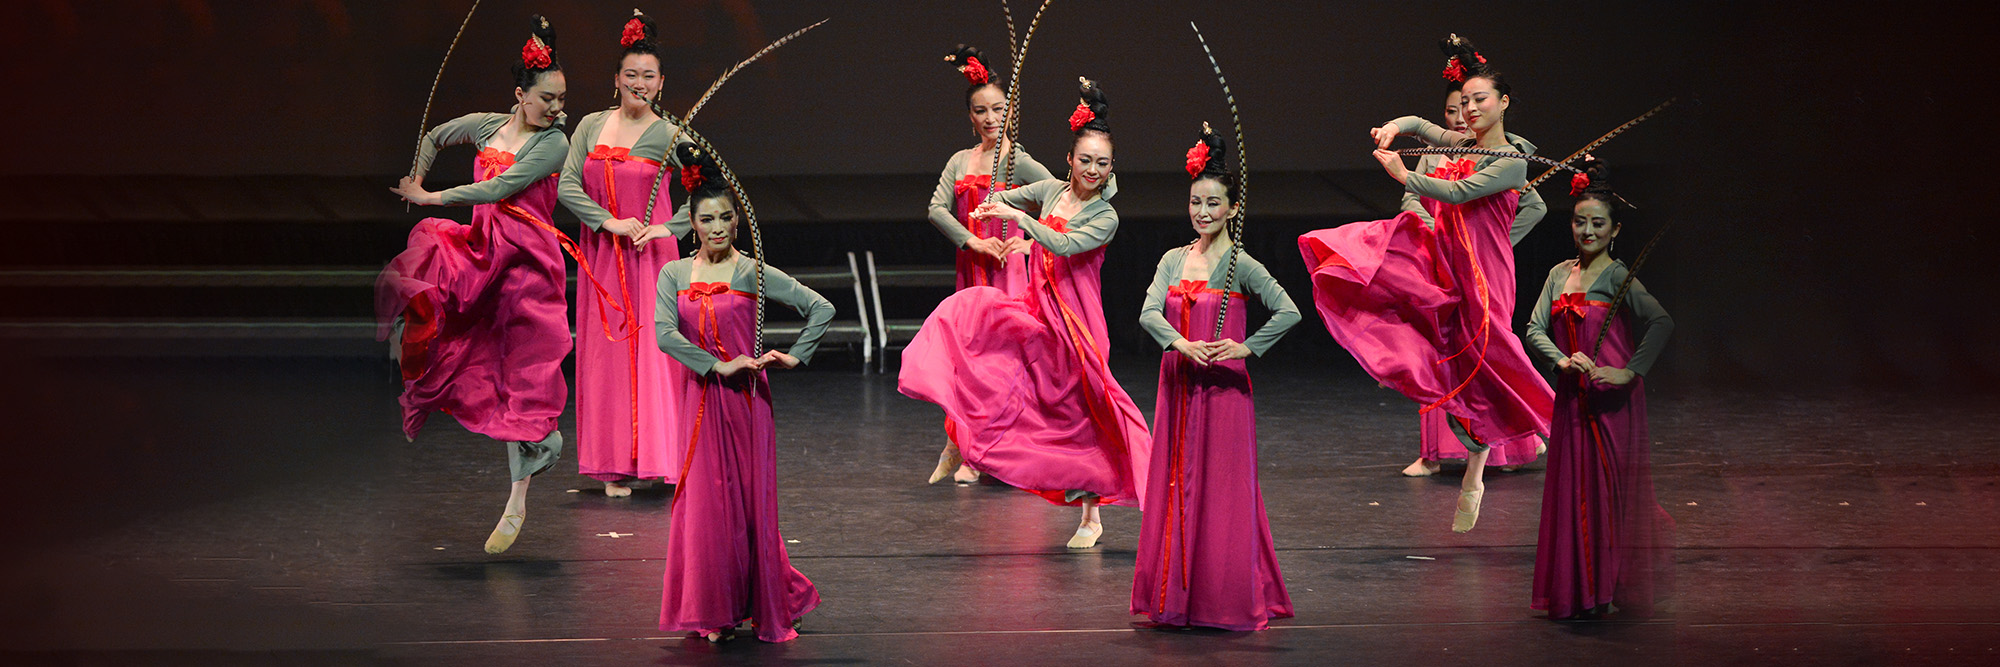 Dancers with Bird-Tail Headpieces